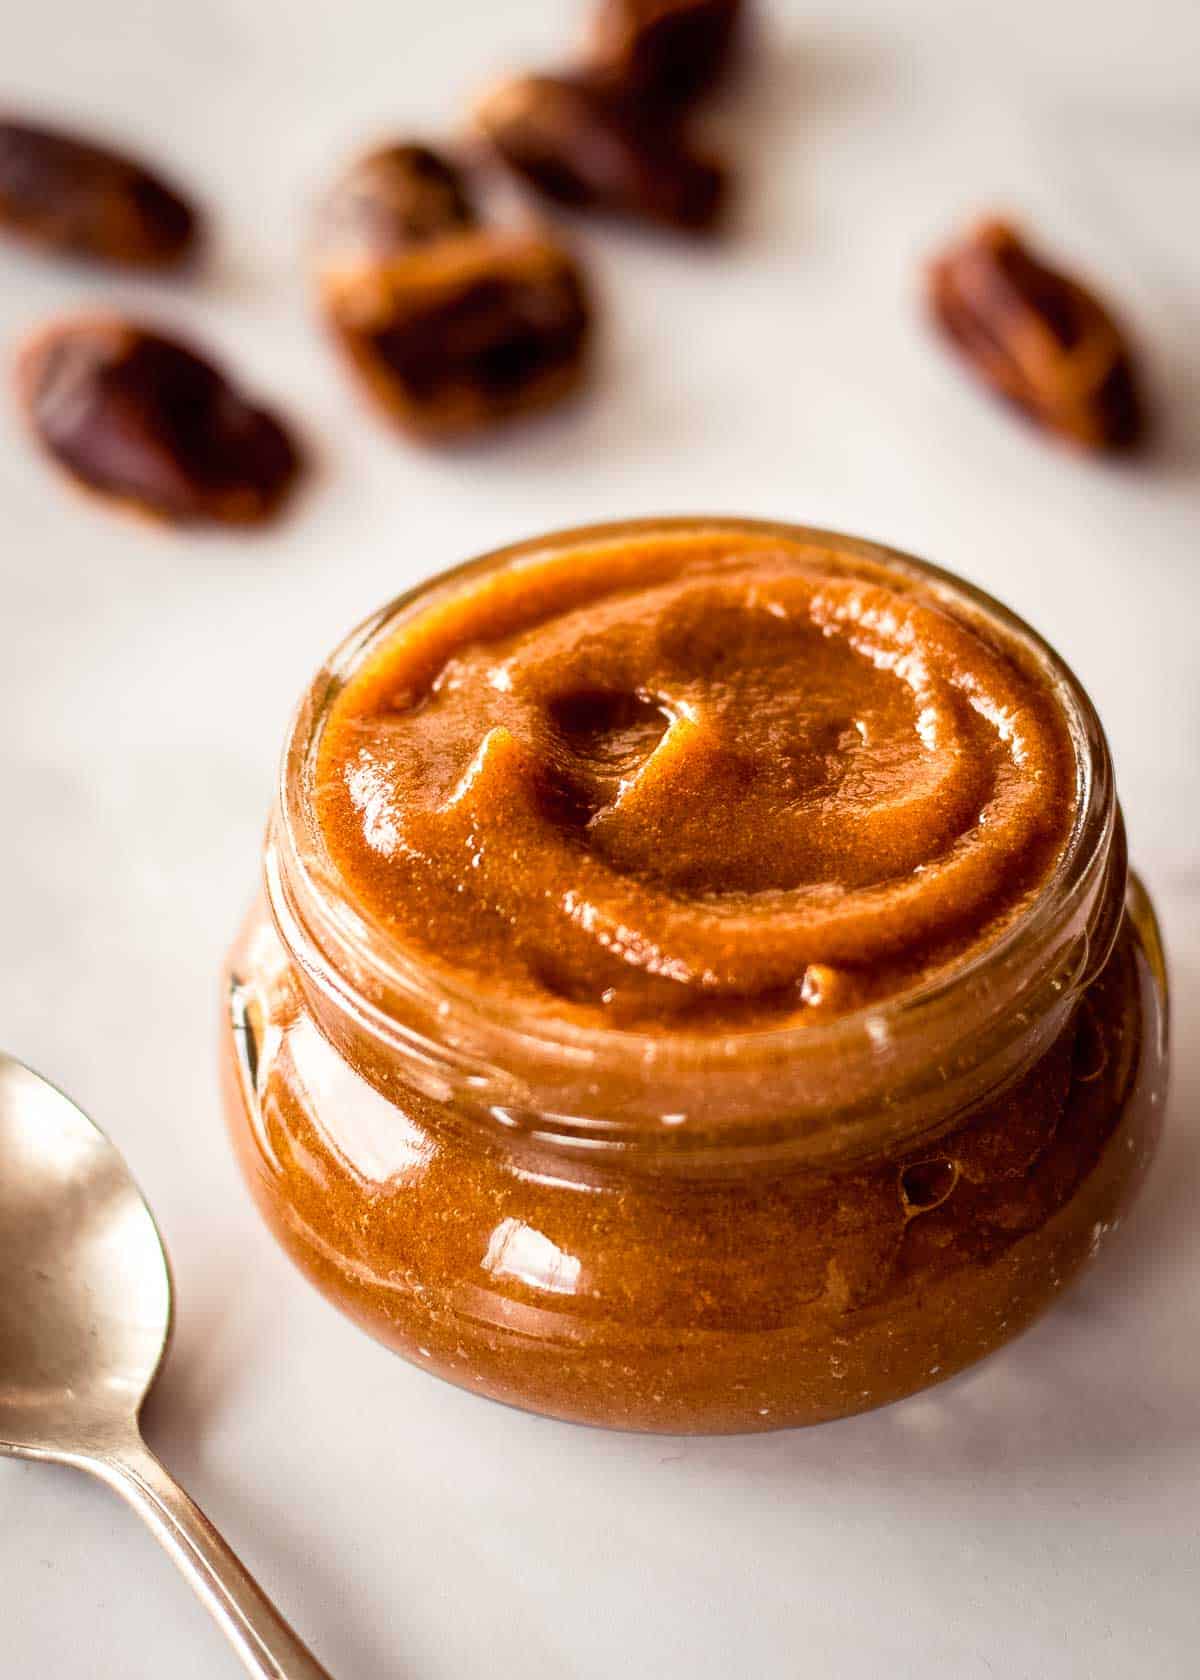 Glass jar of date puree, forming a swirl on top. There are dates in the background and a silver spoon nearby.